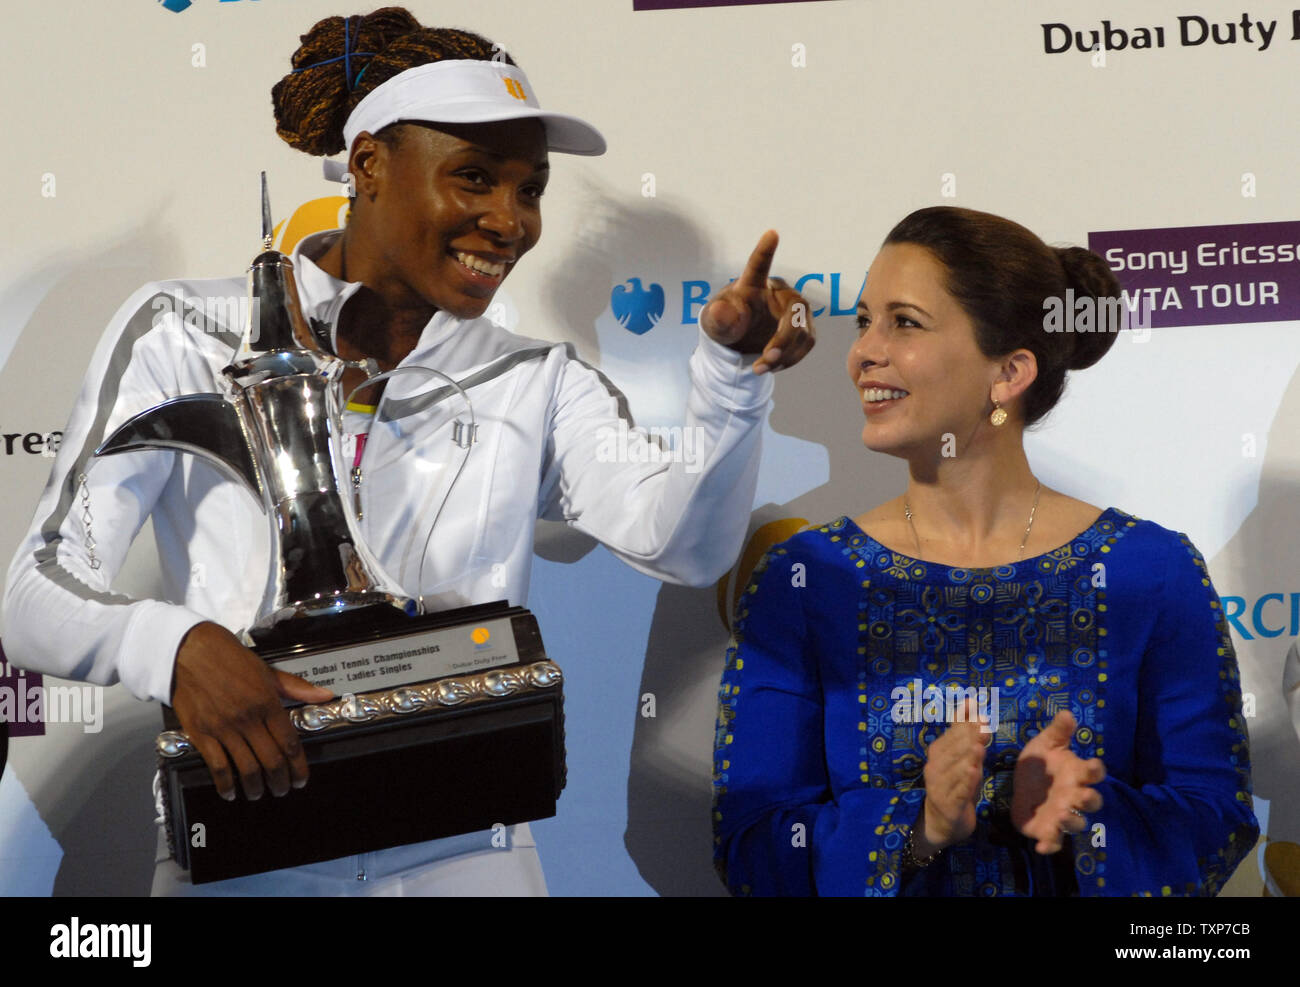 The world No. 6, Venus Williams hold her trophy after it was presented to her by Princess Haya (R) the wife of the ruler of Dubai, Sheikh Mohammed bin Rashid El Maktoum. Williams defeated Virginie Razzano from France in the finals of the Women's Dubai Championships, Saturday February 21, 2009.  Williams won the match 6-4, 6-2. (UPI Photo/Norbert Schiller) Stock Photo